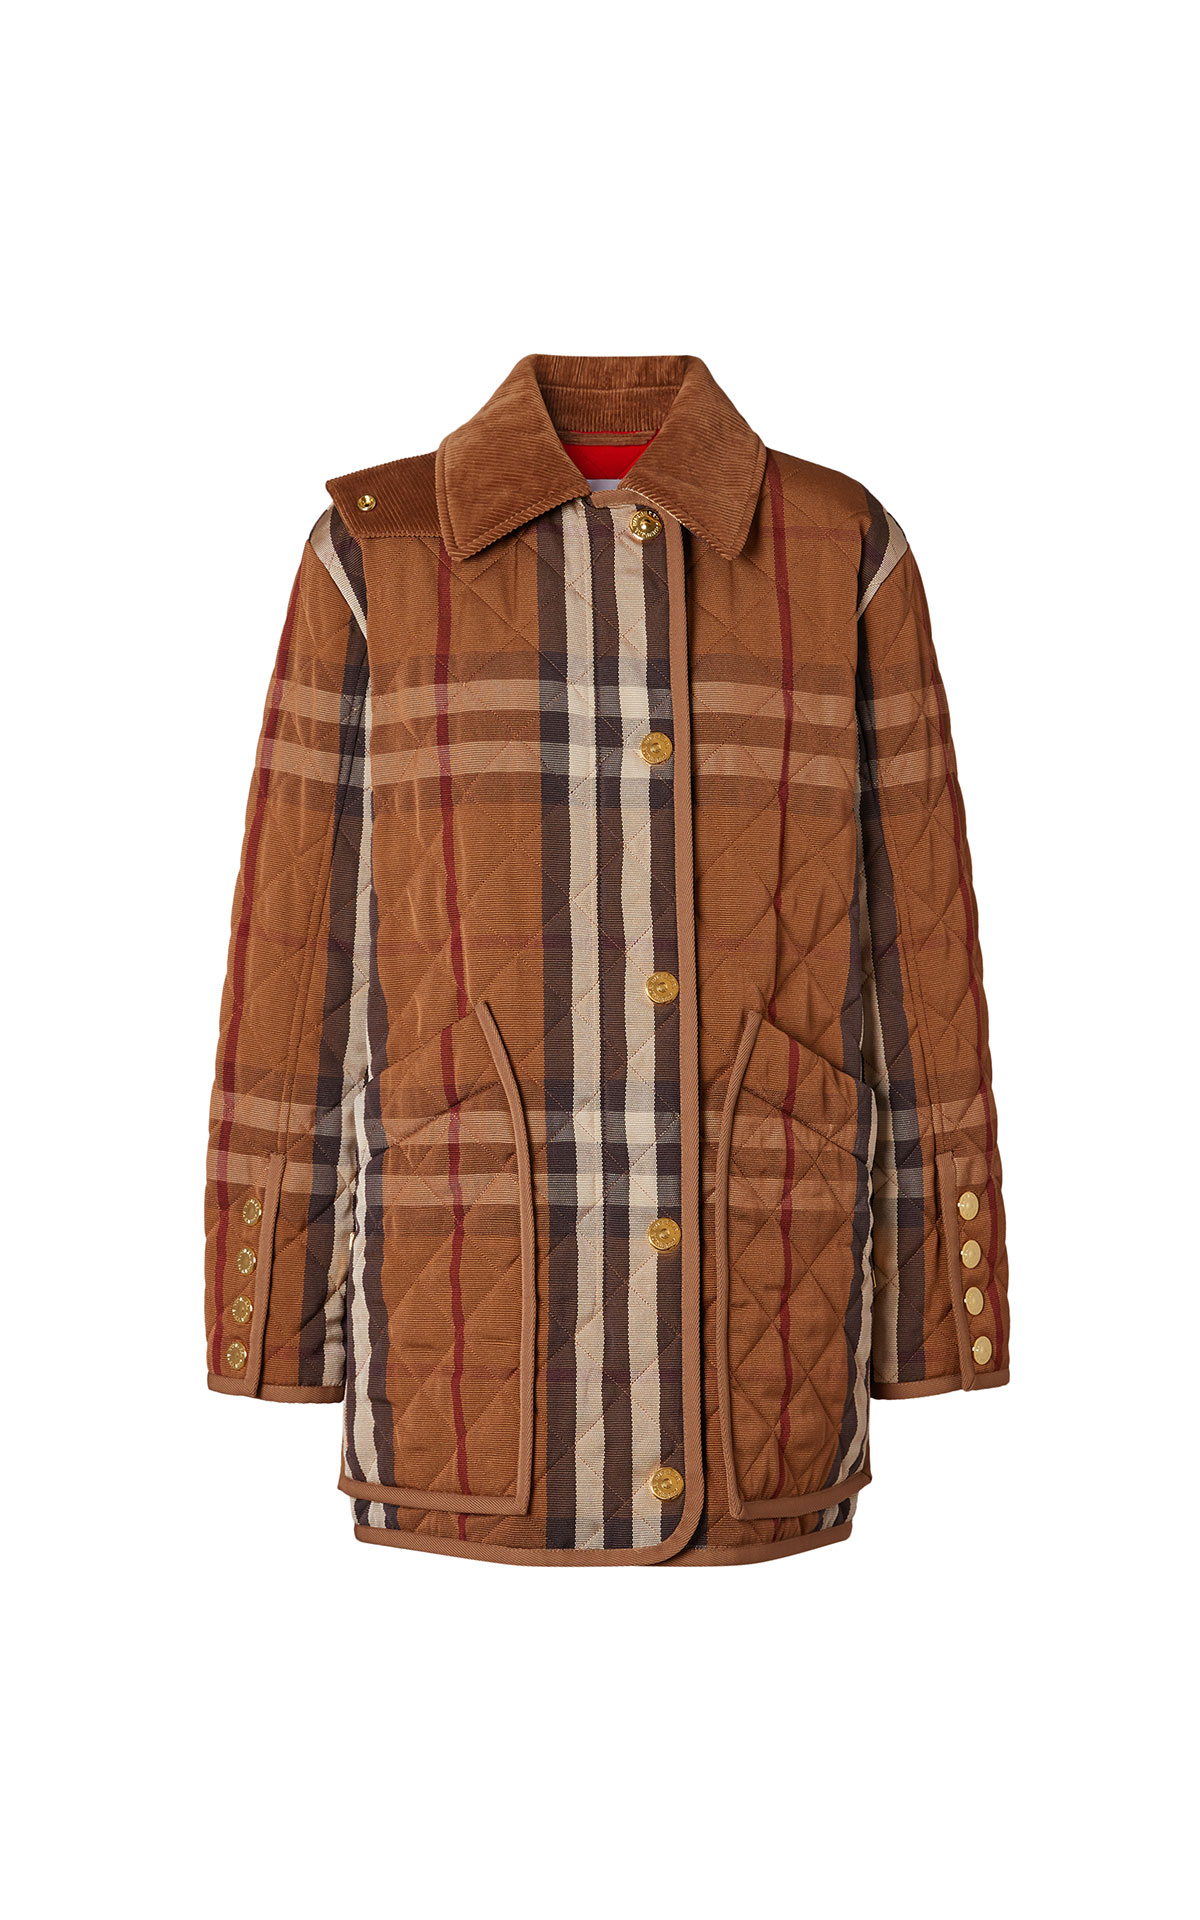 Burberry Diamond quilted check technical cotton barn jacket from Bicester Village